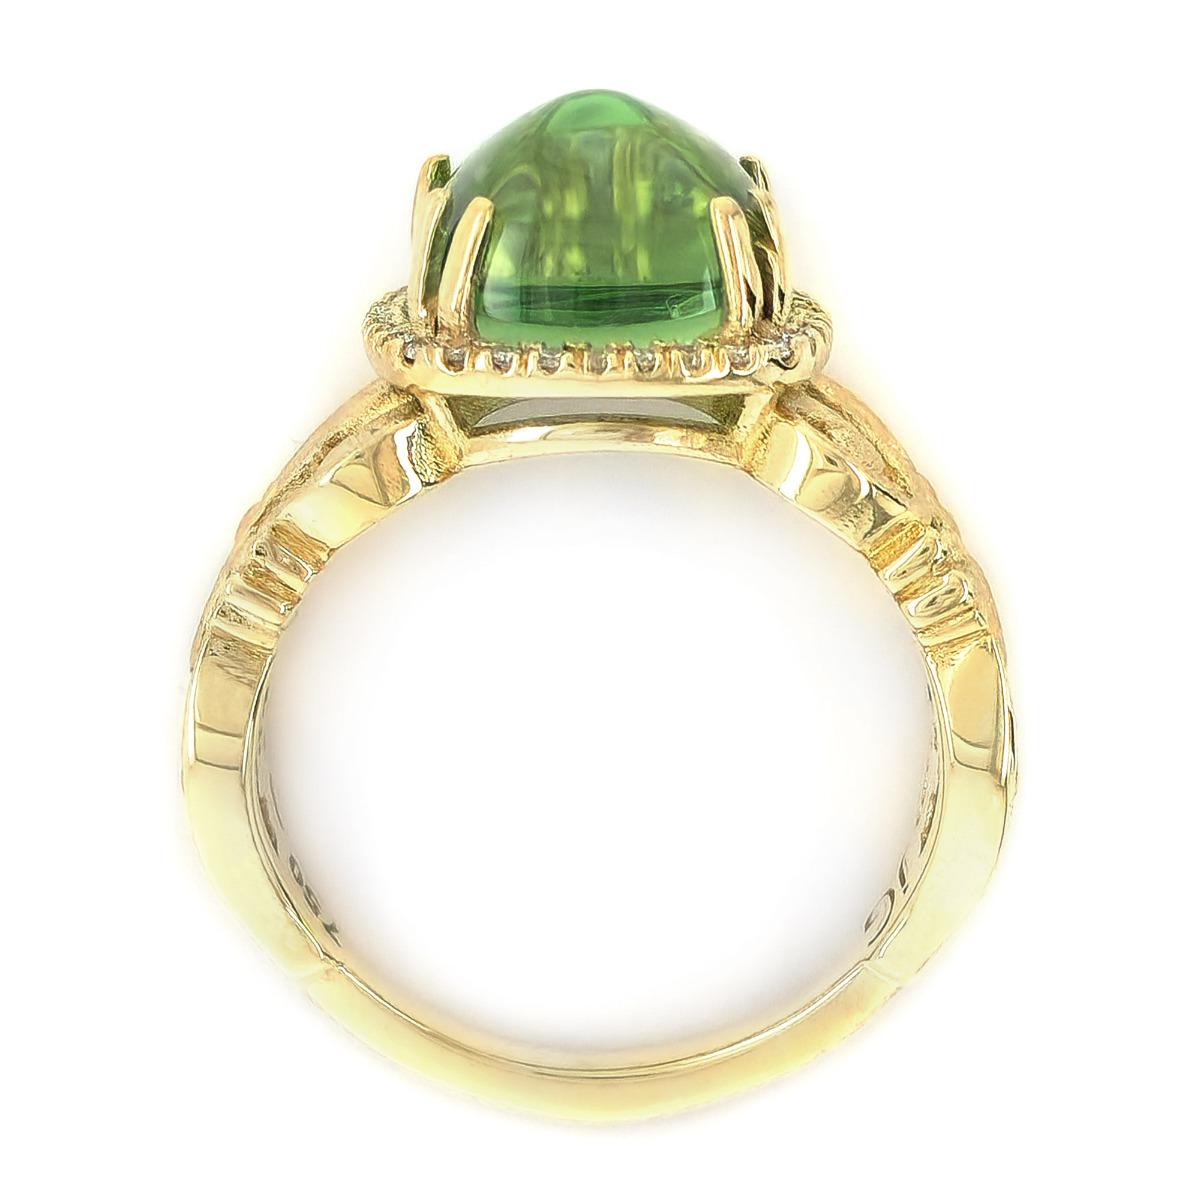 Tourmaline, symbolizing friendship and wealth, finds its embodiment in this exquisitely crafted 5.42-carat gemstone. The cabochon cut enhances the grandeur of the gemstone, bringing it to life. Complemented by perfectly matched diamonds, this ring